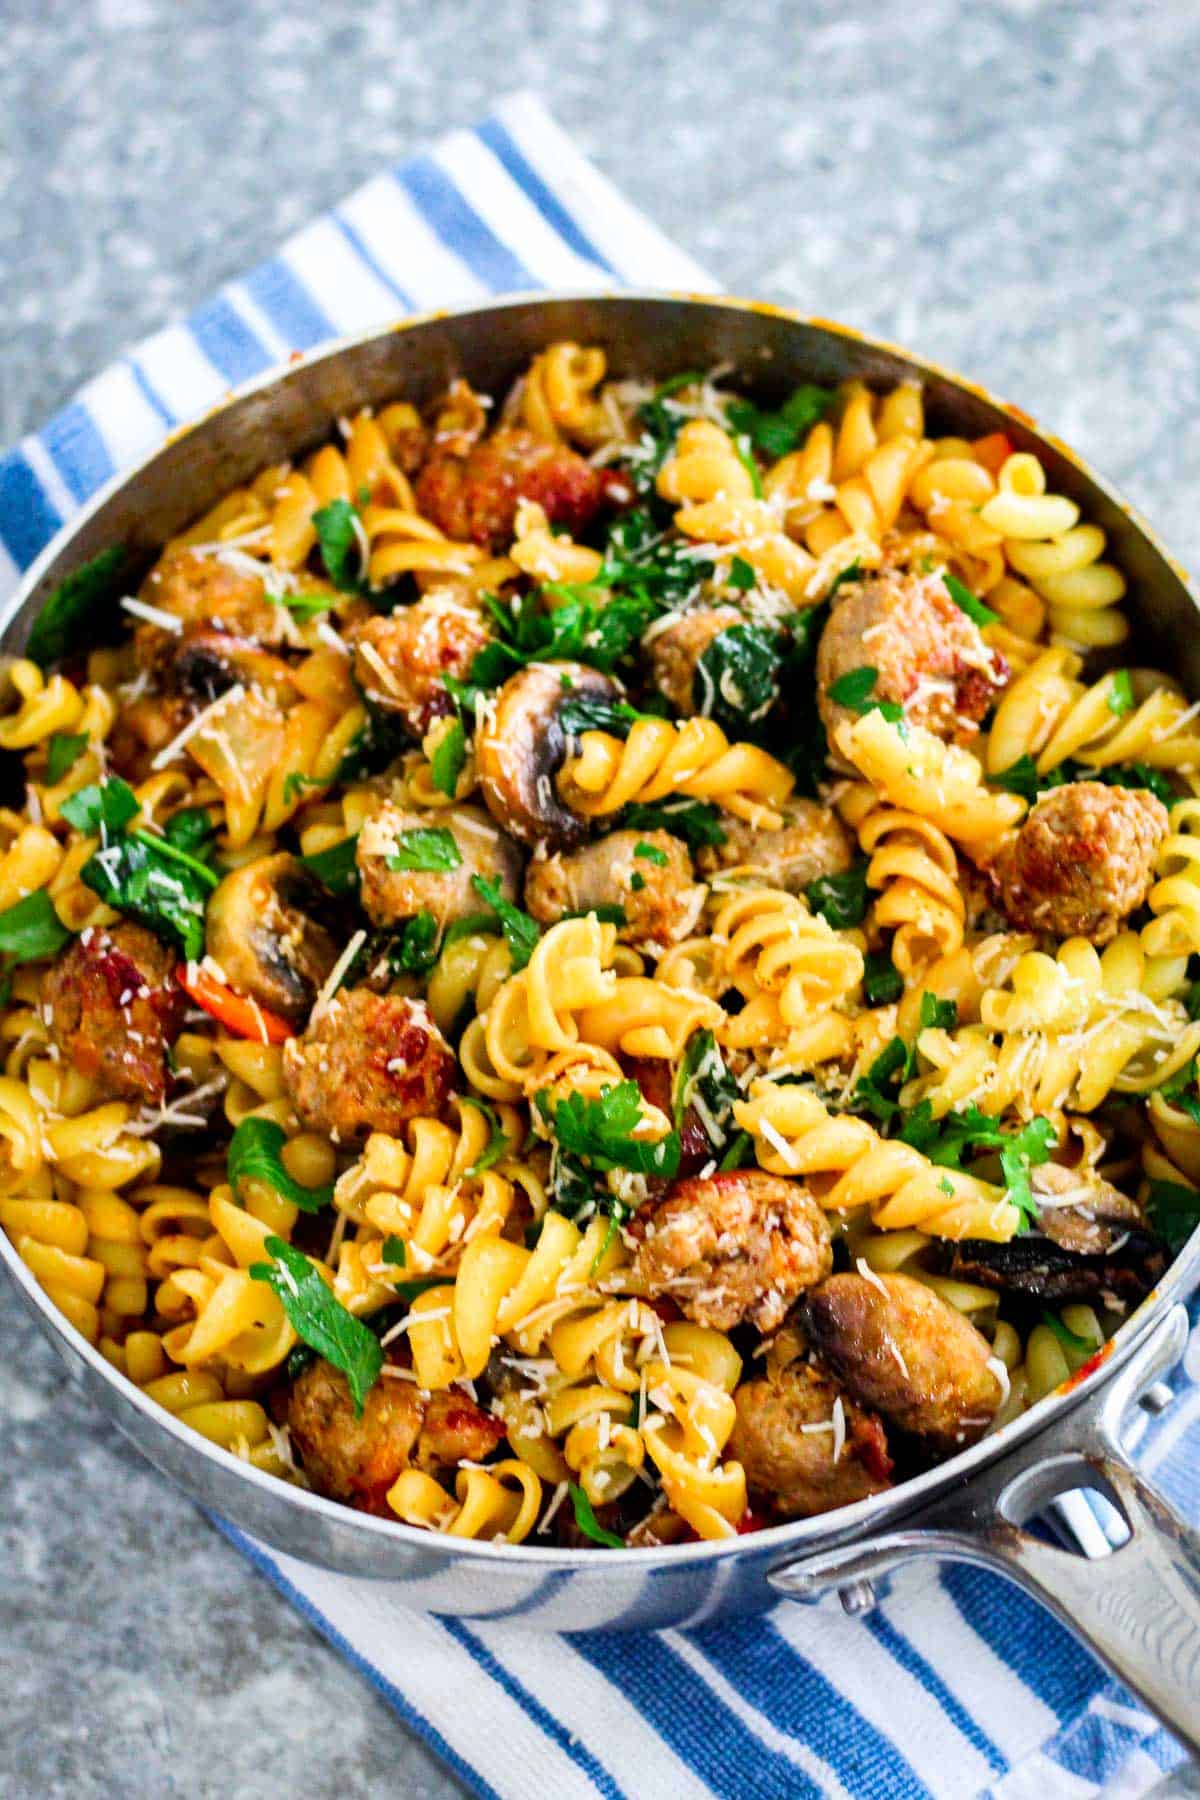 Fusilli pasta with sausages, spinach, mushrooms and cheese shown in a deep pan, ready to serve family style.